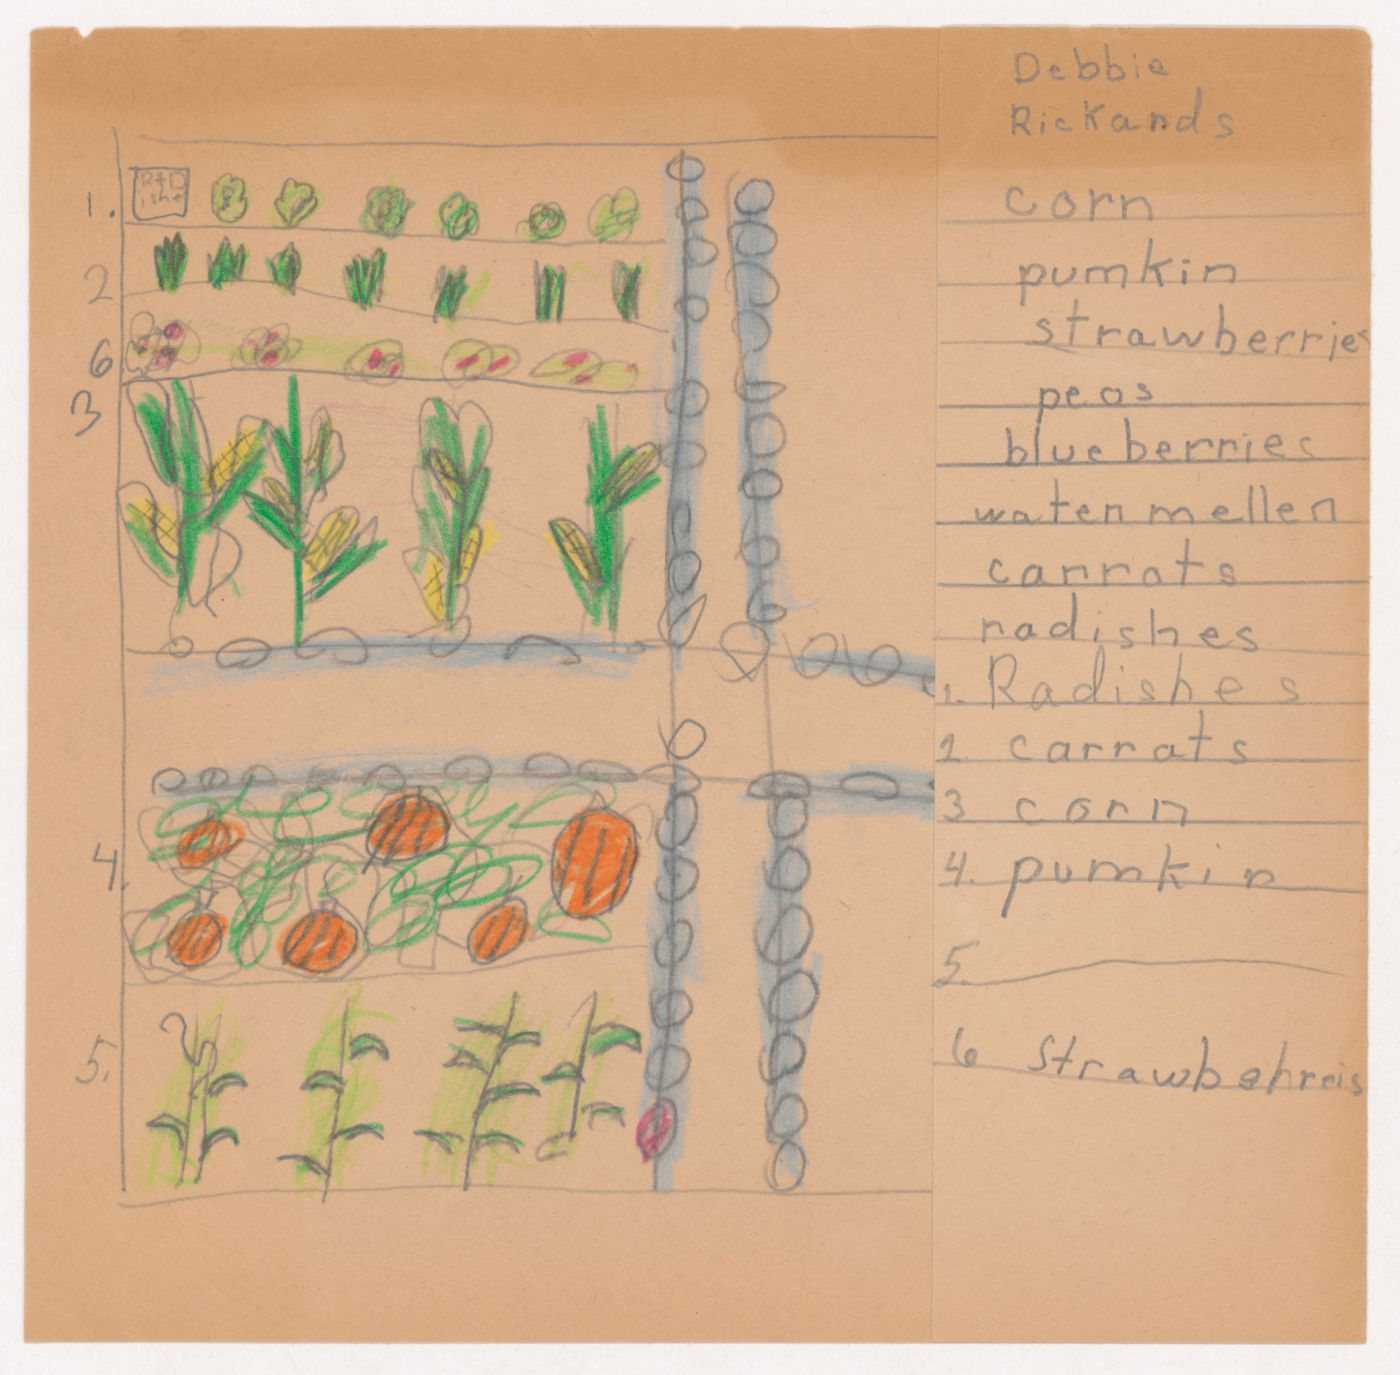 Child's drawing and list for the ideal fruits and vegetables garden